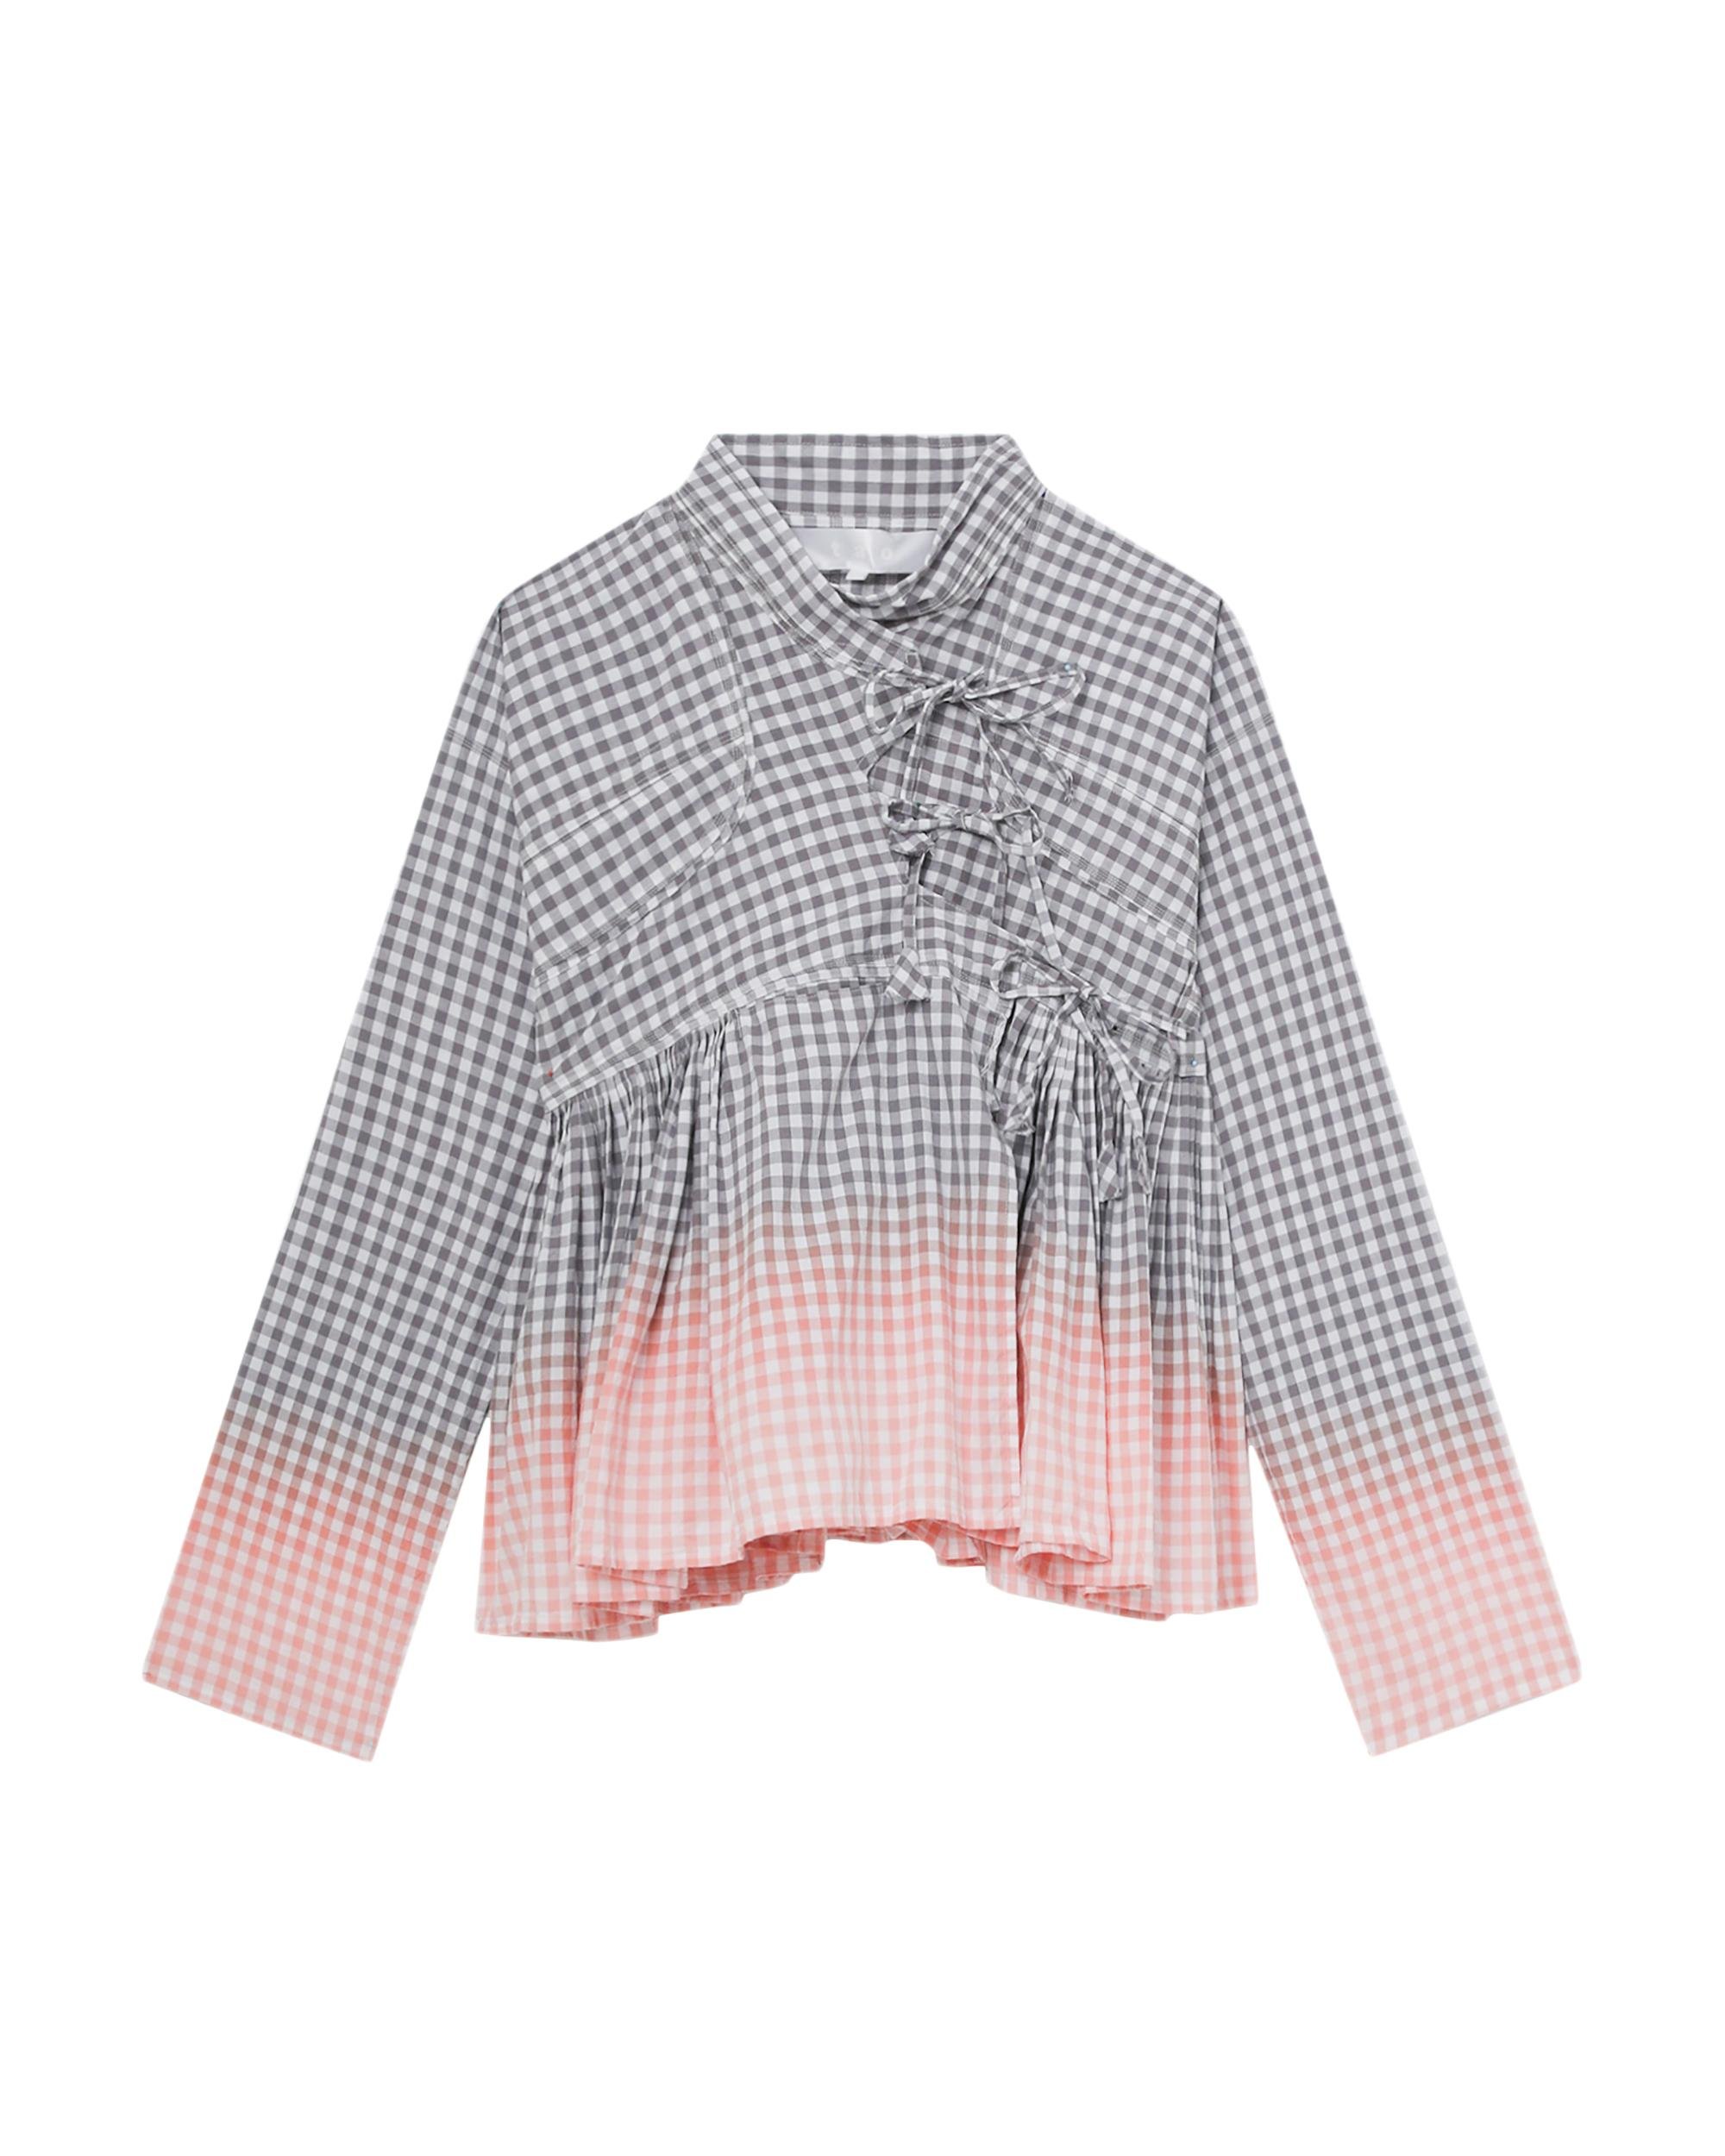 Gradient asymmetric checked blouse by TAO